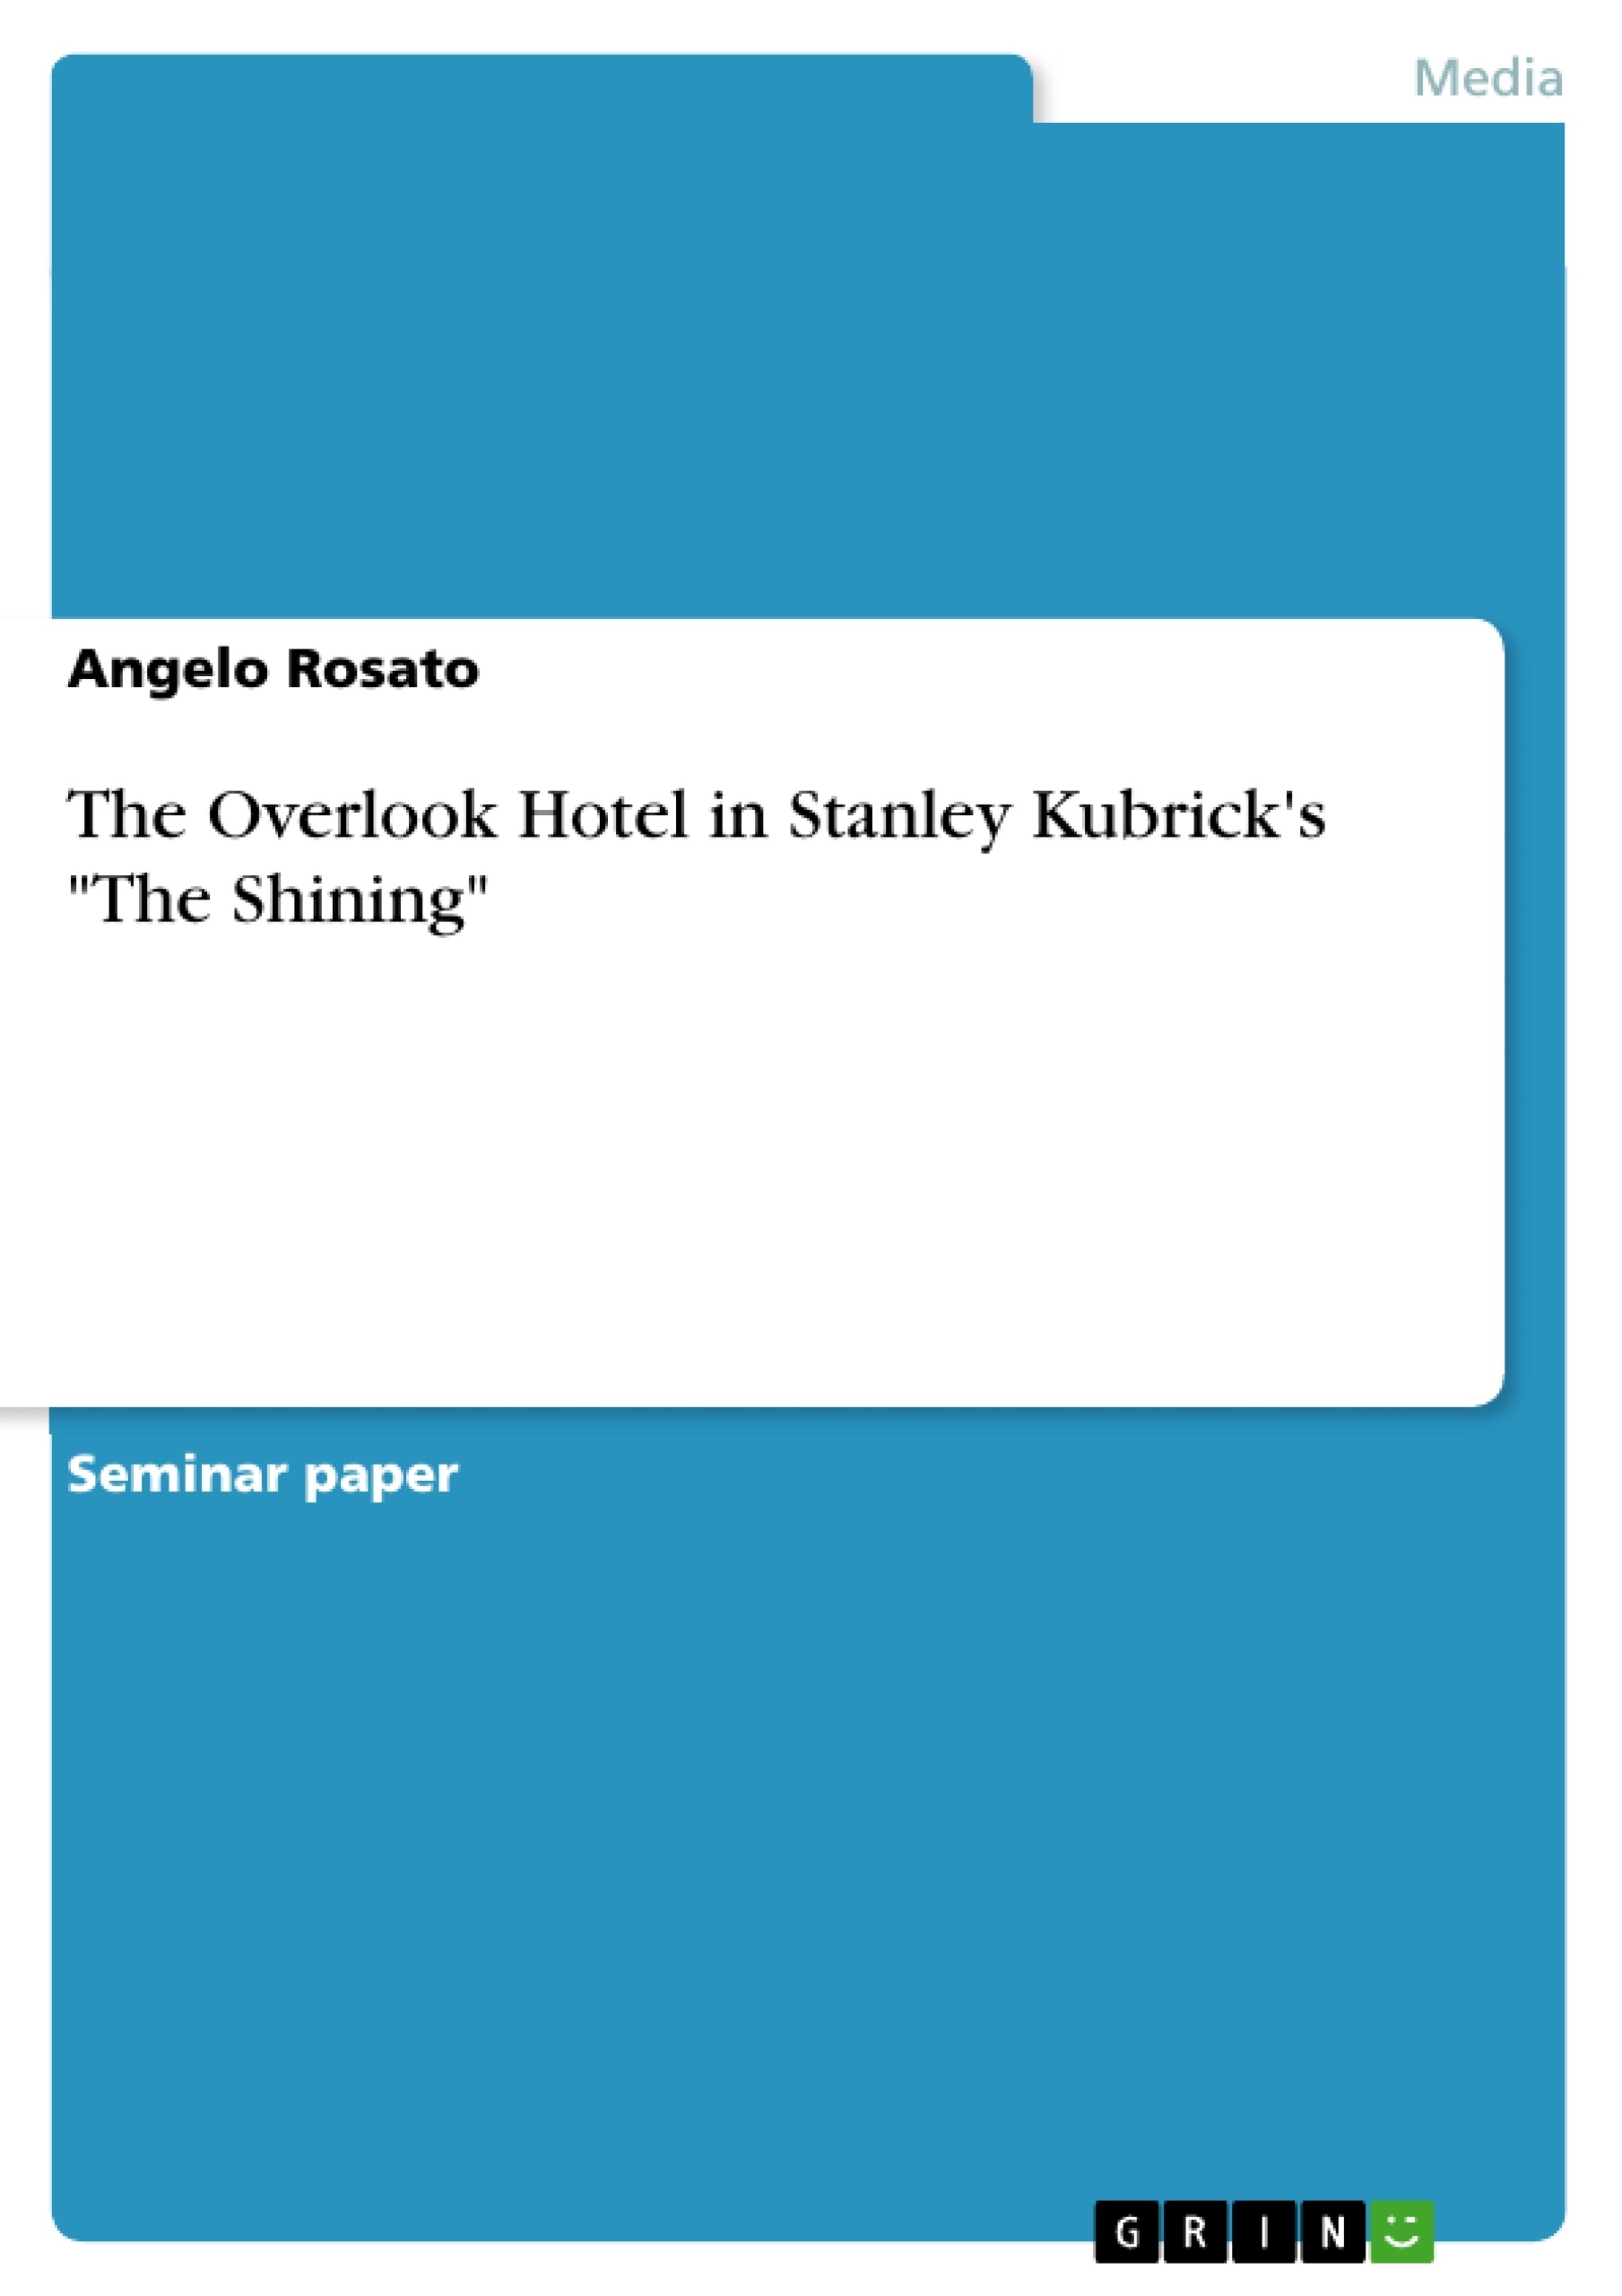 Title: The Overlook Hotel in Stanley Kubrick's "The Shining"